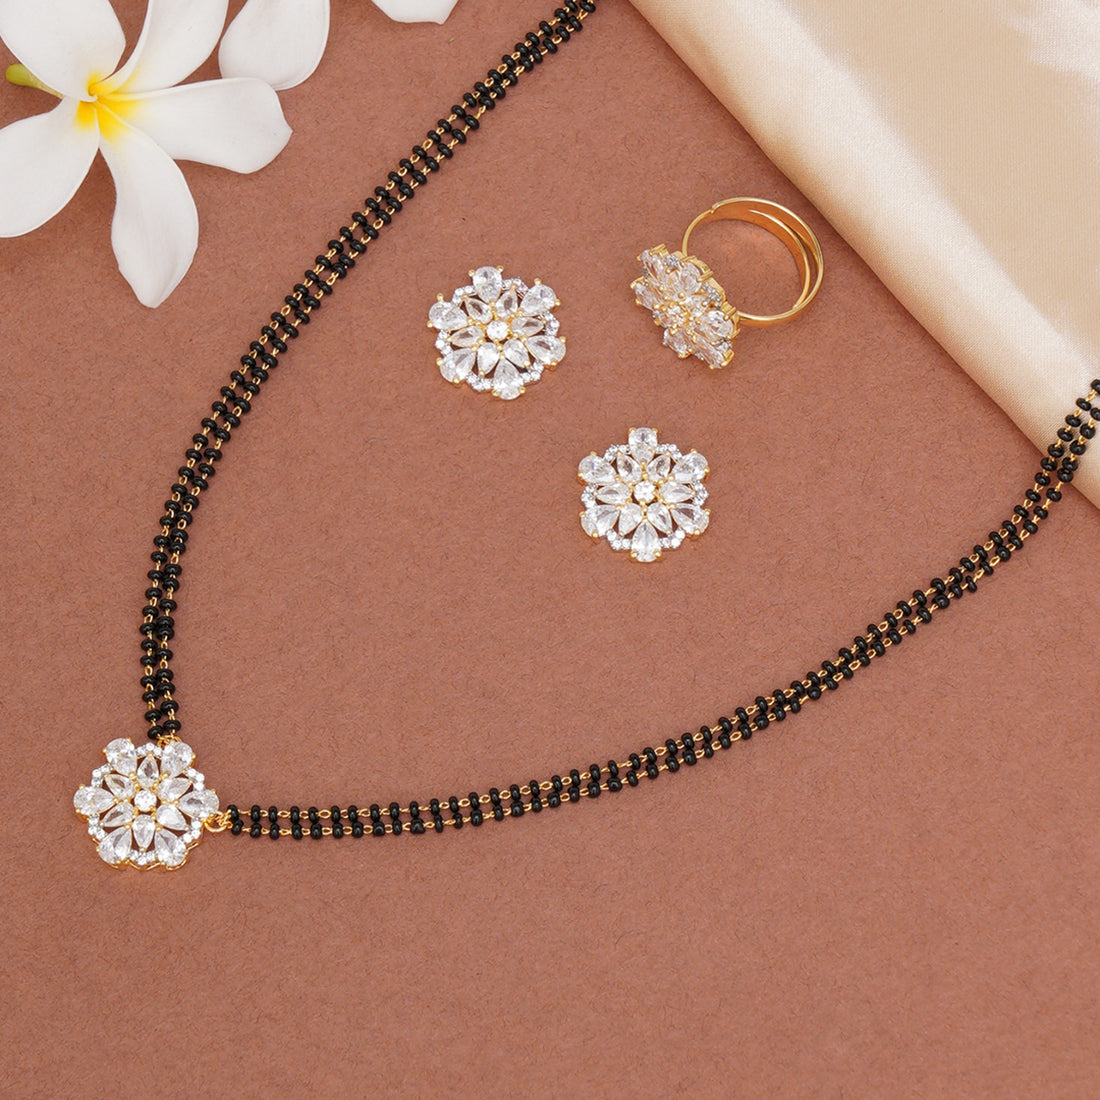 Black & Gold-Toned Cubic Zirconia Studded Mangalsutra, Earrings and Ring Set